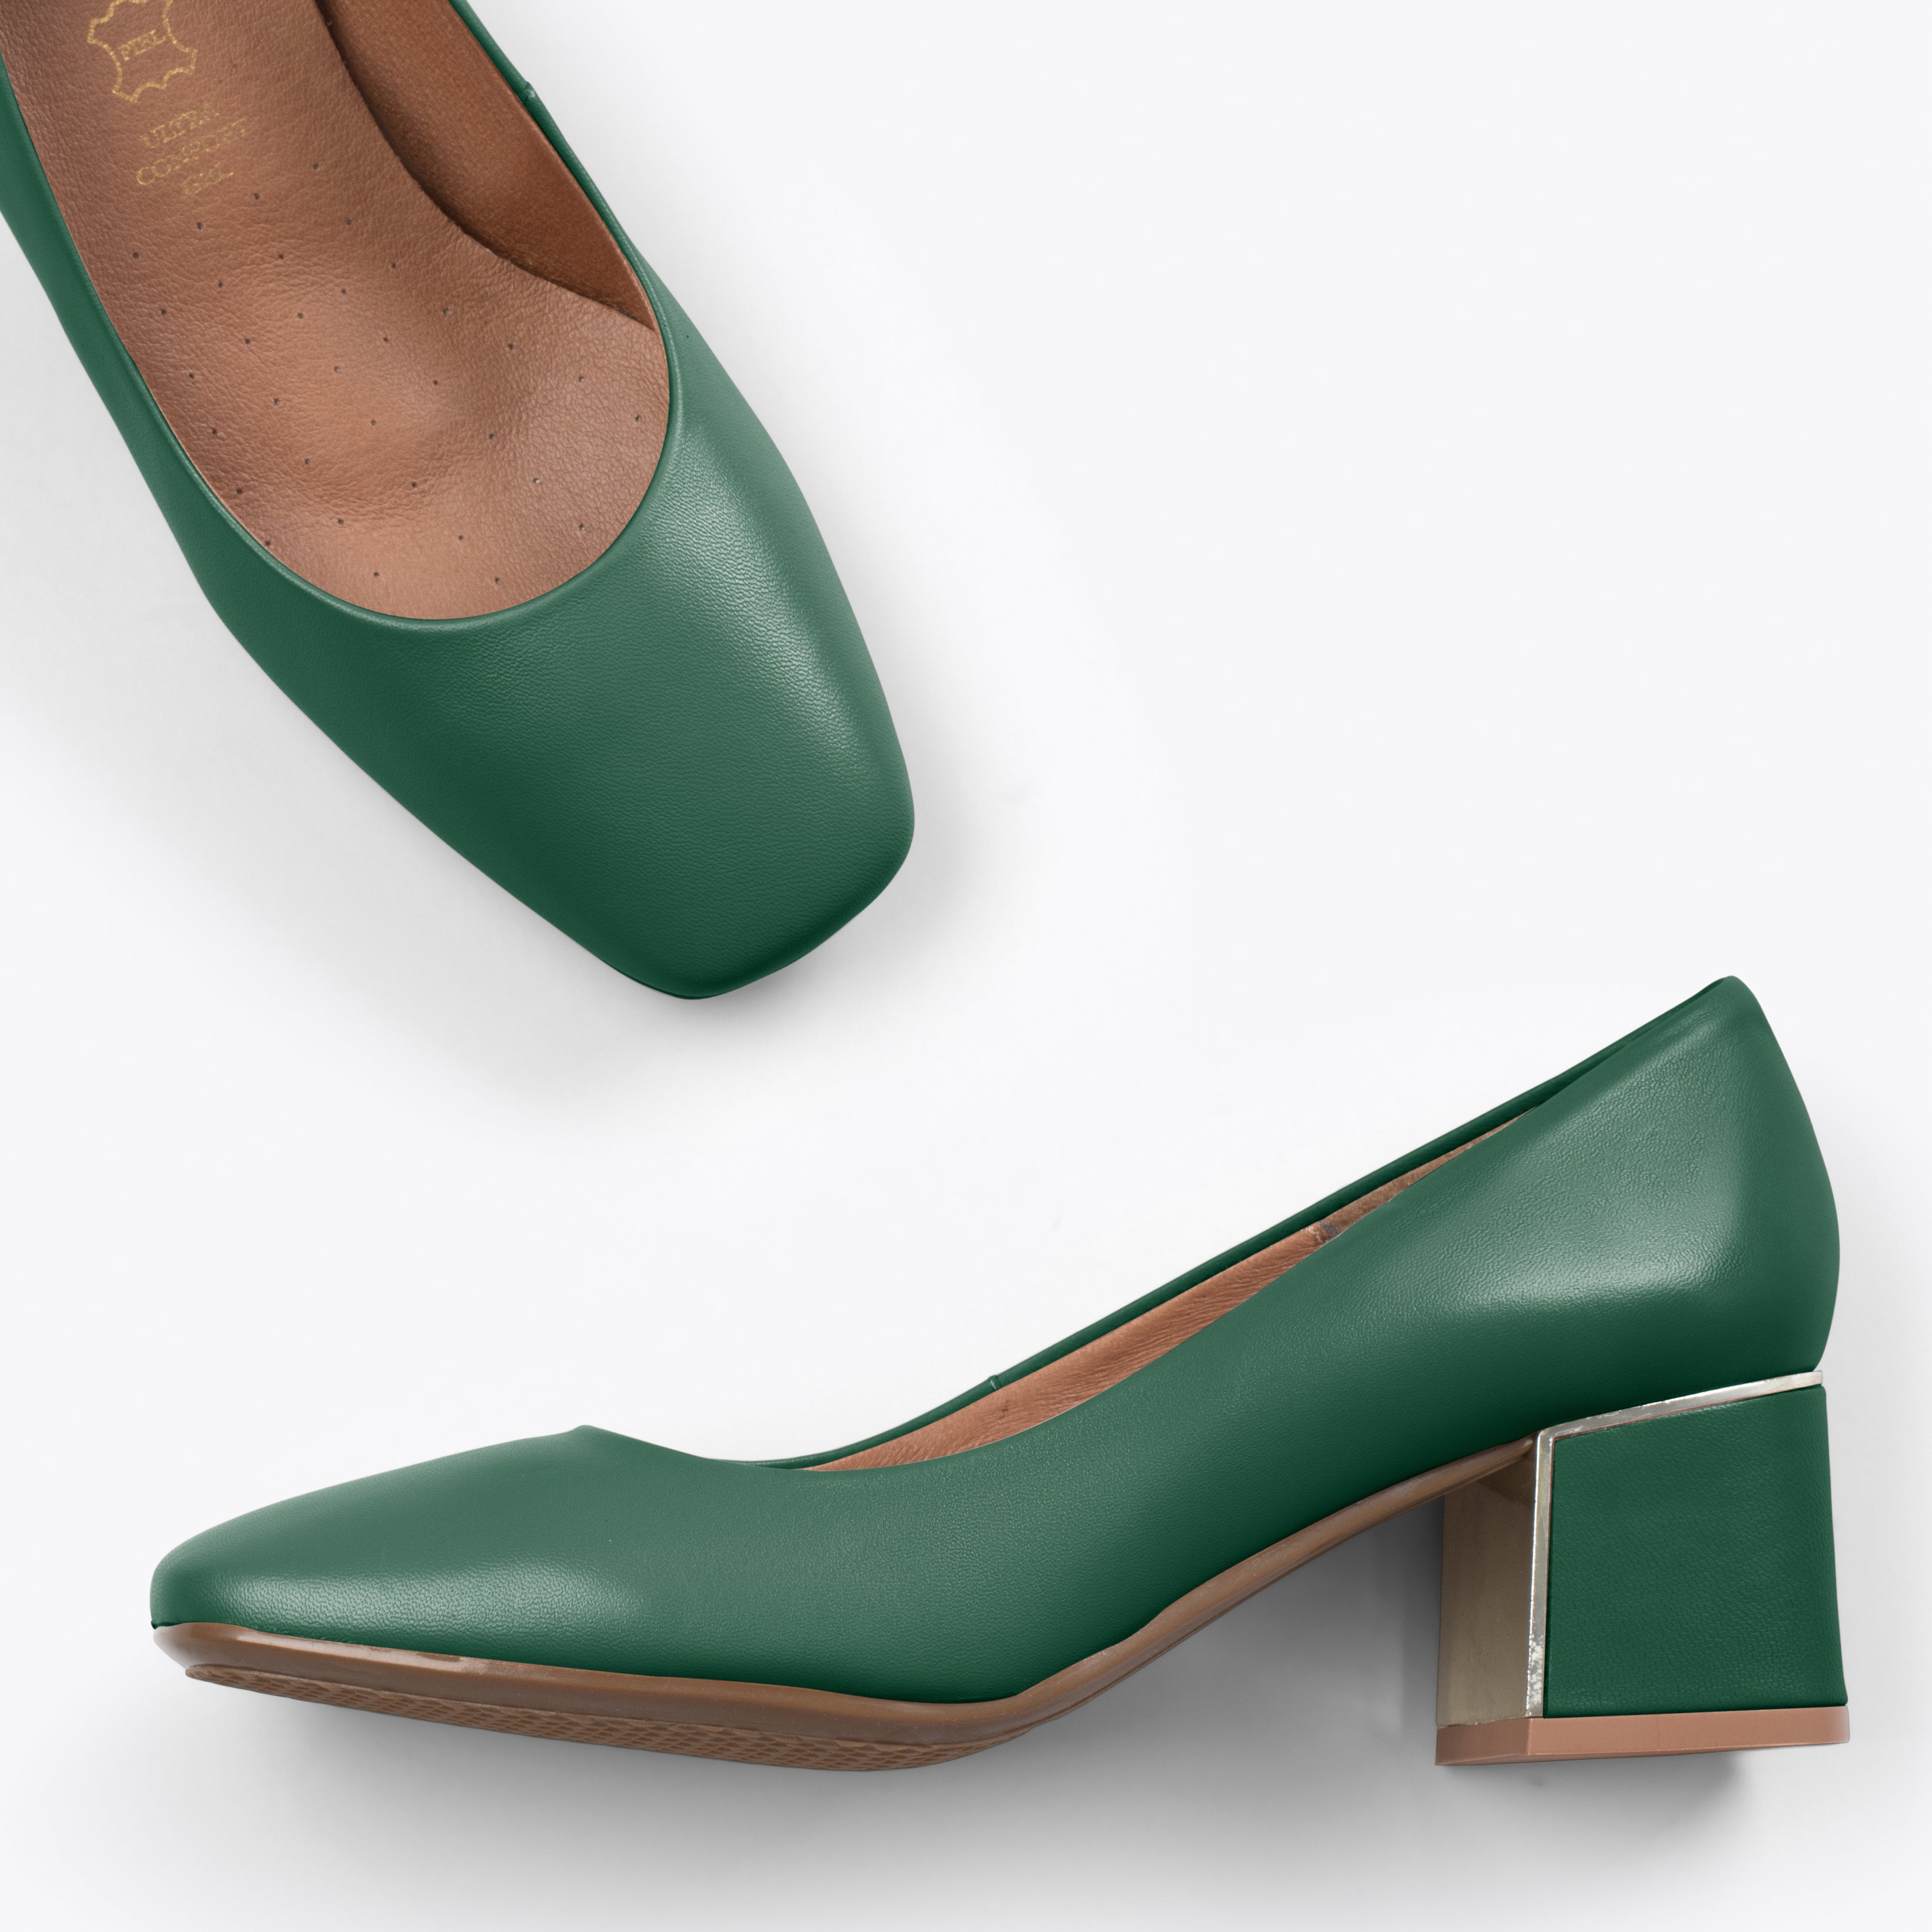 FEMME – GREEN high heels with square toe